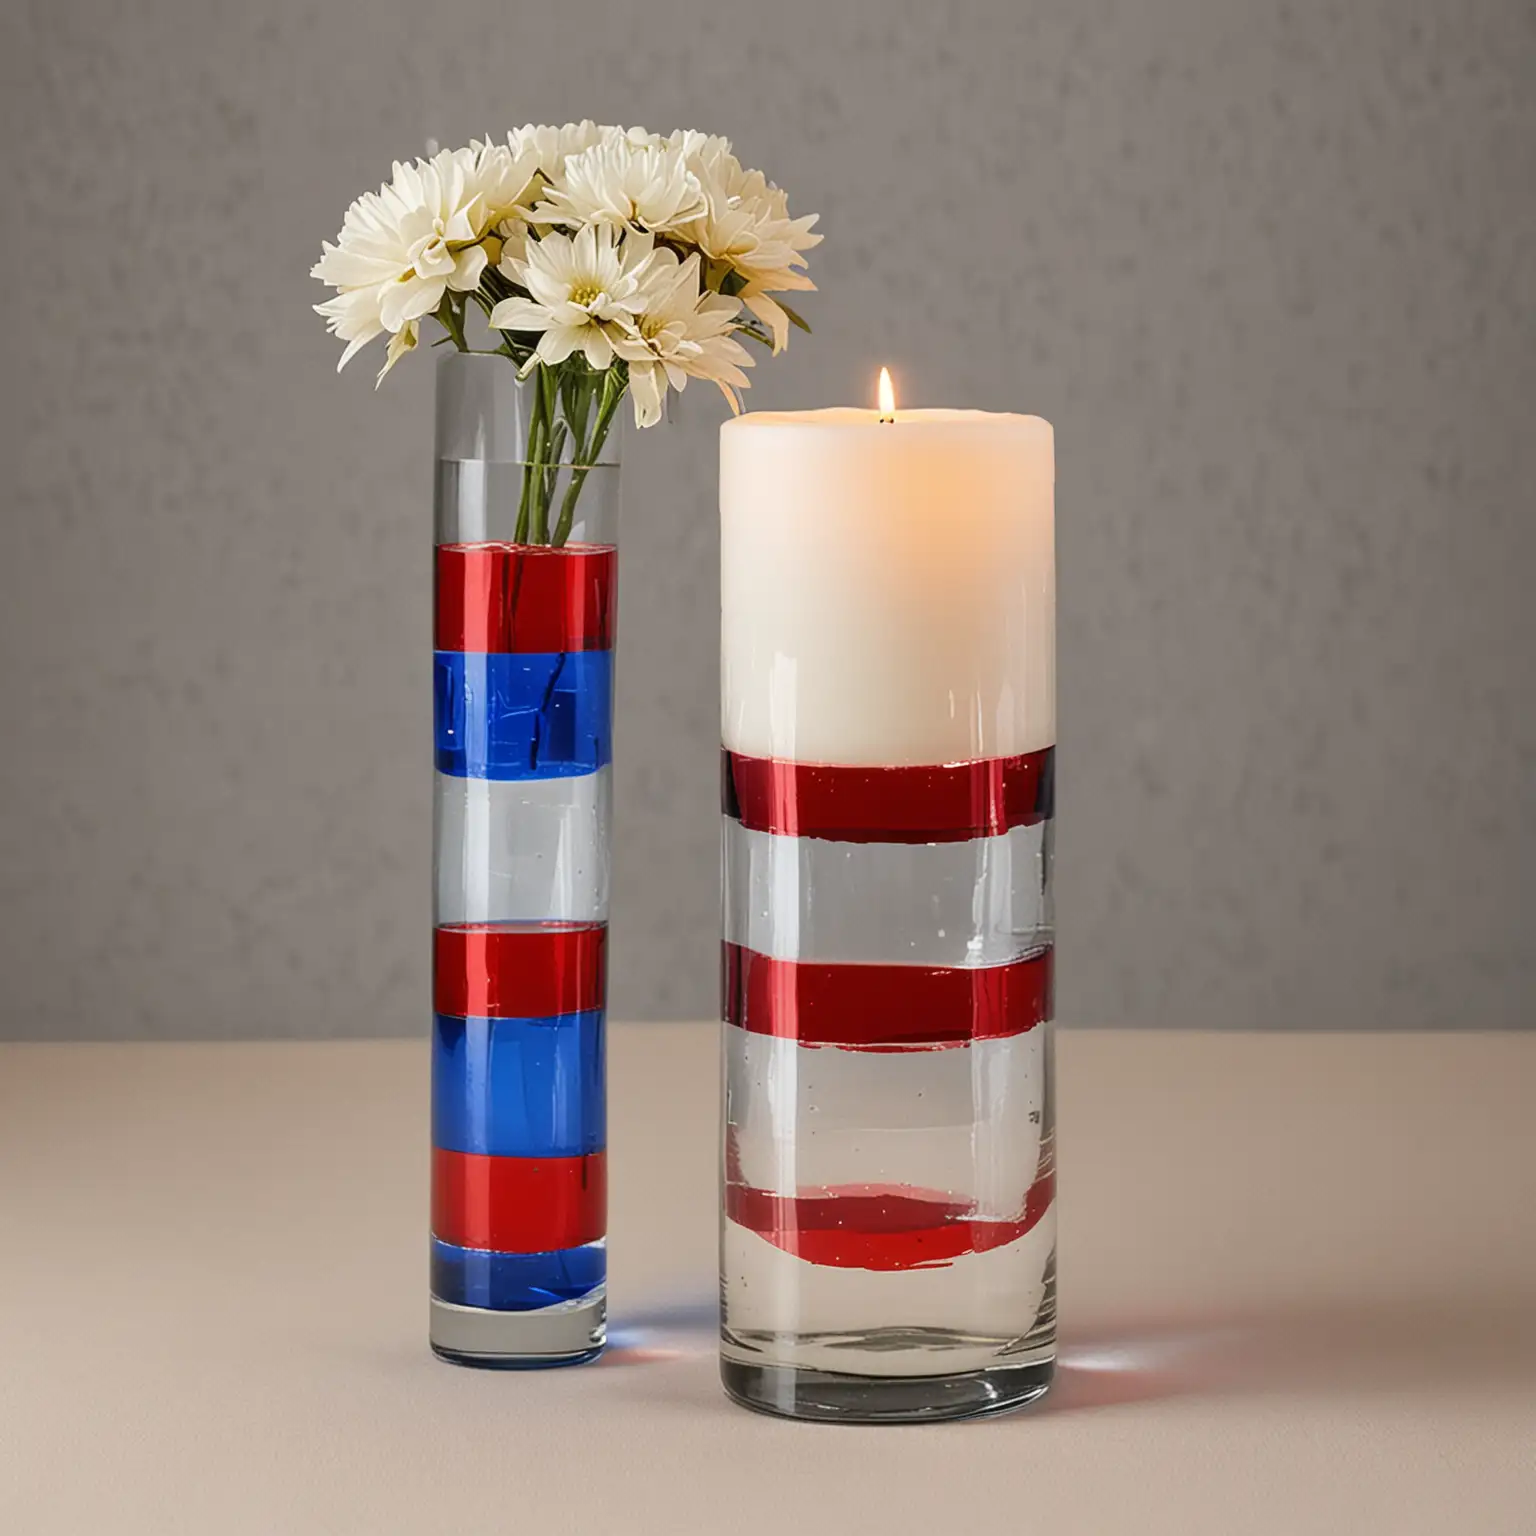 simple cylinder glass vase wedding centerpiece DIY decorated with red white and blue